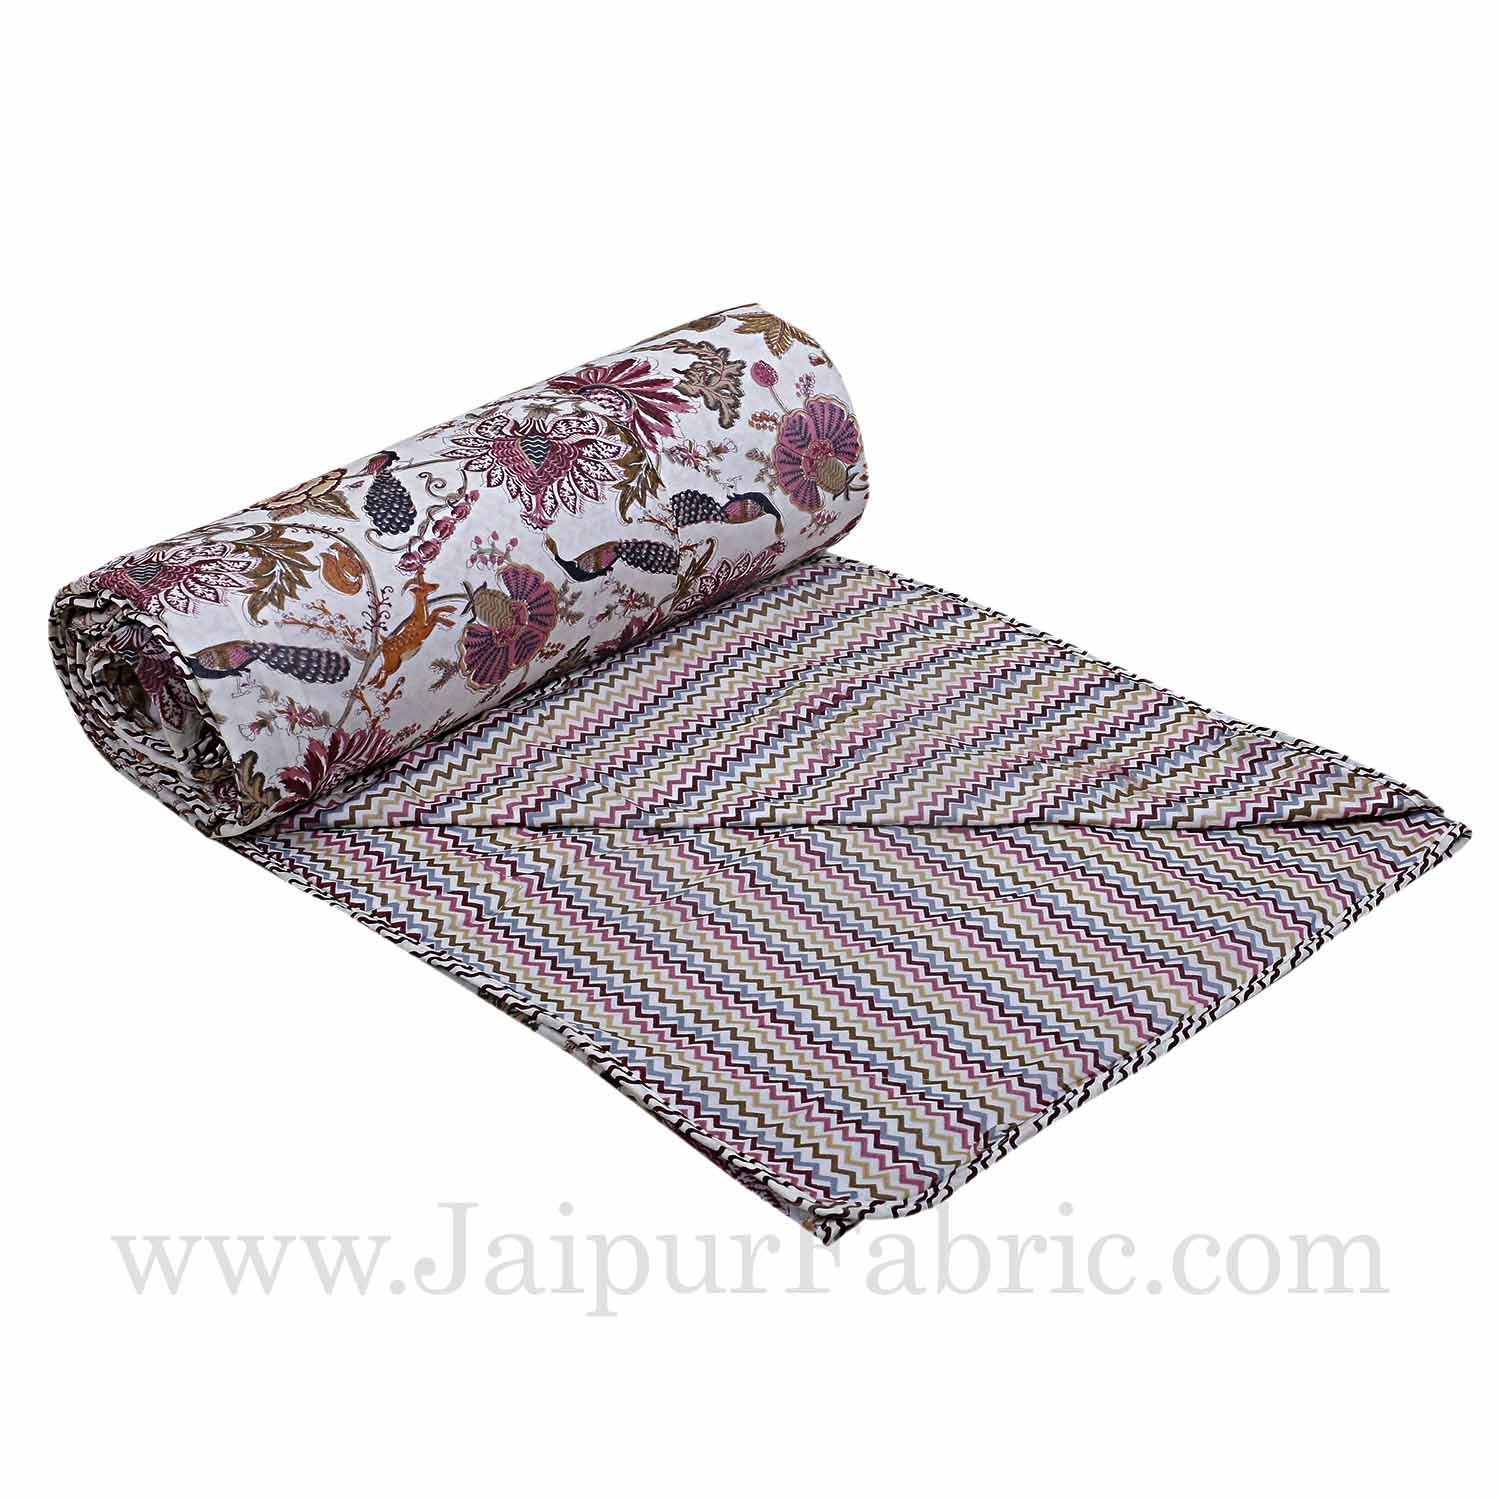 Muslin Cotton Double bed Reversible mulmul Dohar in seamless plum floral print